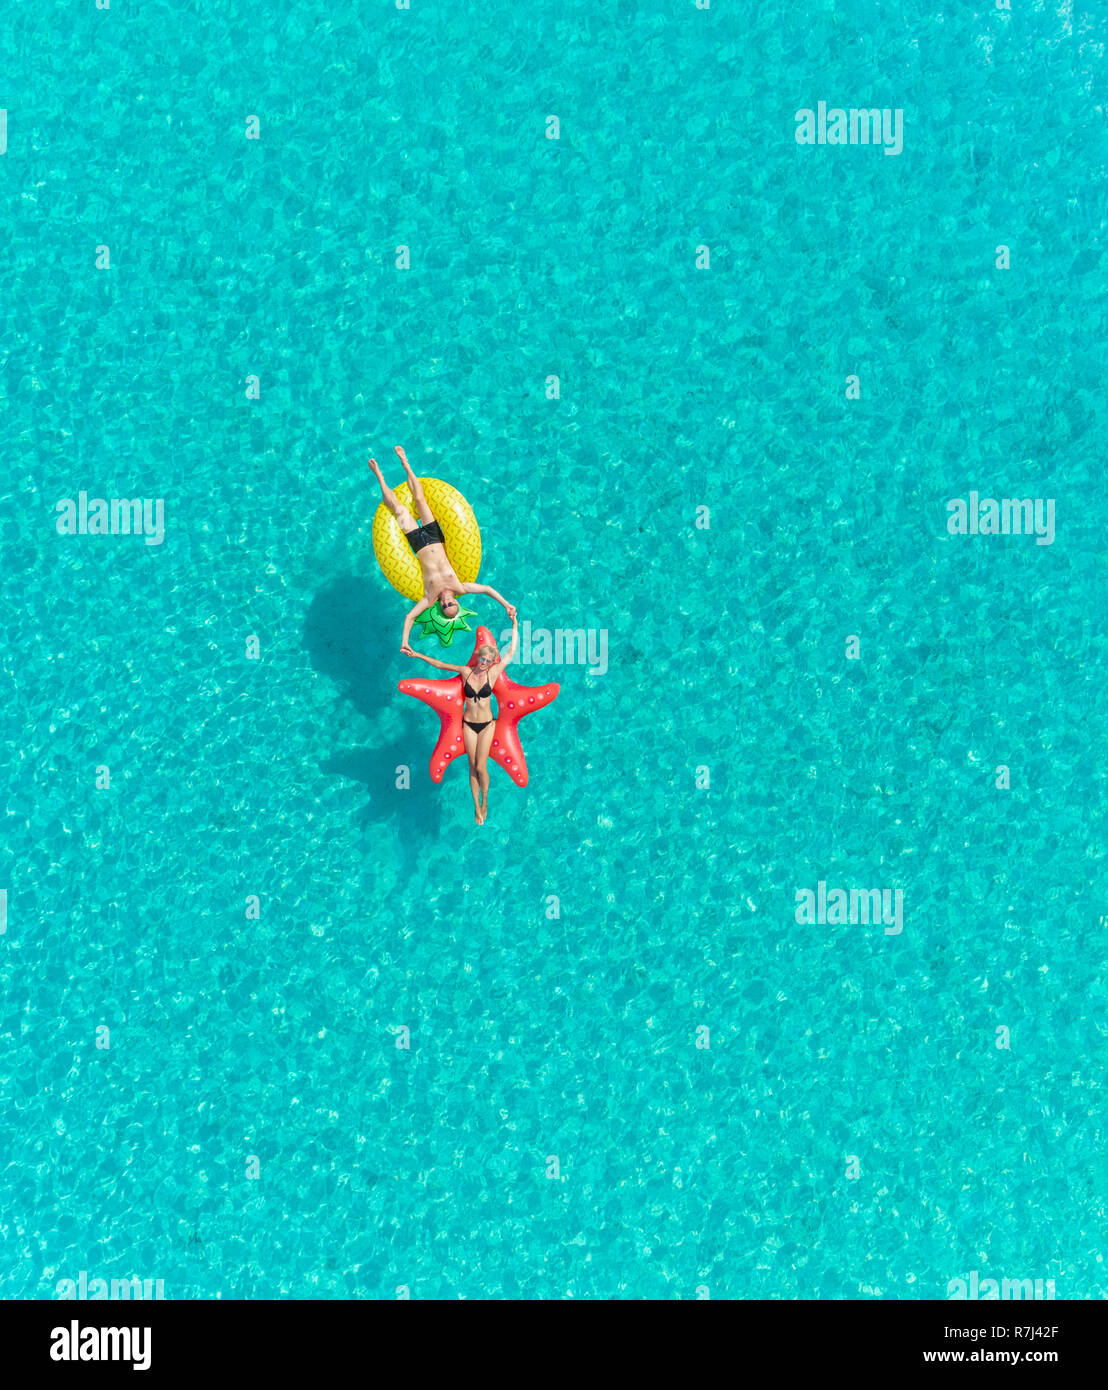 Aerial view of man and woman floating on inflatable star and pineapple shaped mattresses joining hands. Stock Photo